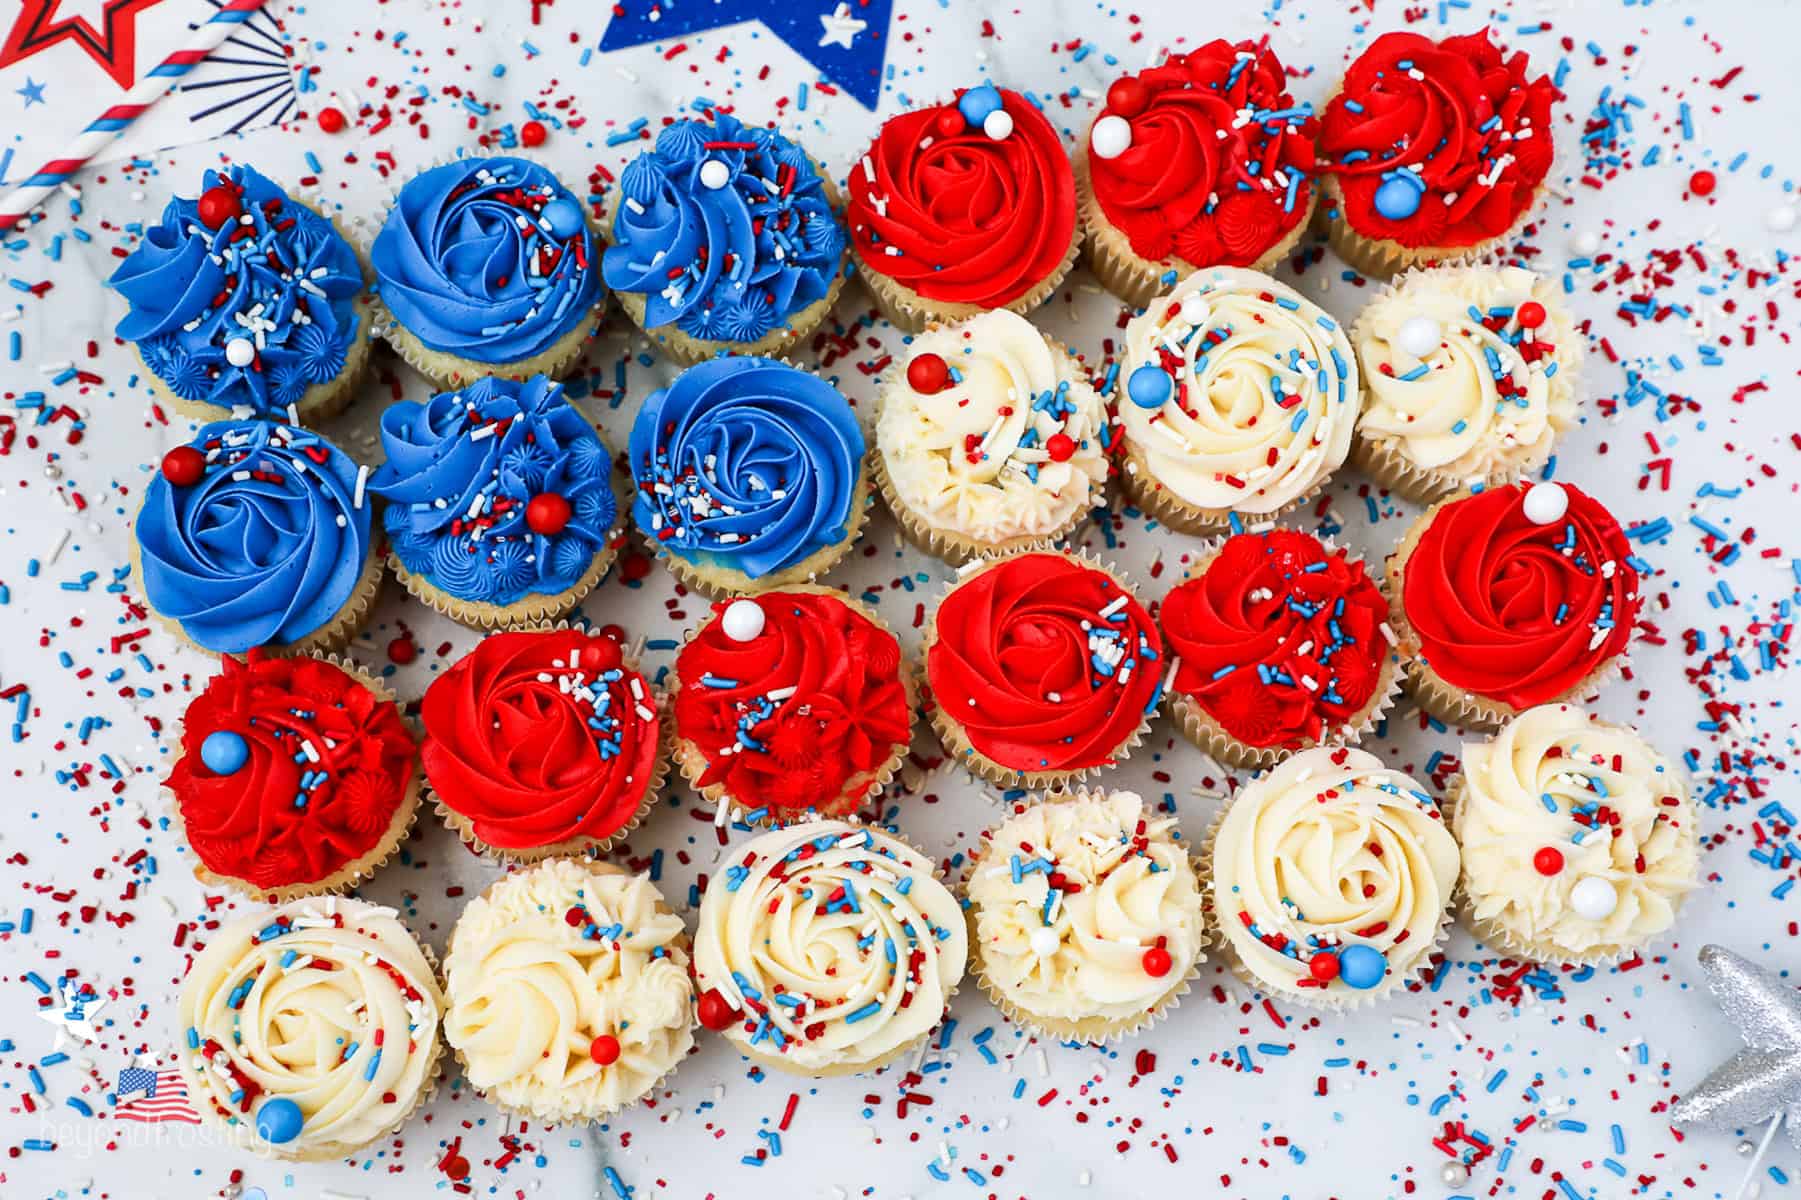 Overhead view of cupcakes decorated with red, white, and blue frosting and sprinkles arranged in the shape of an American flag.